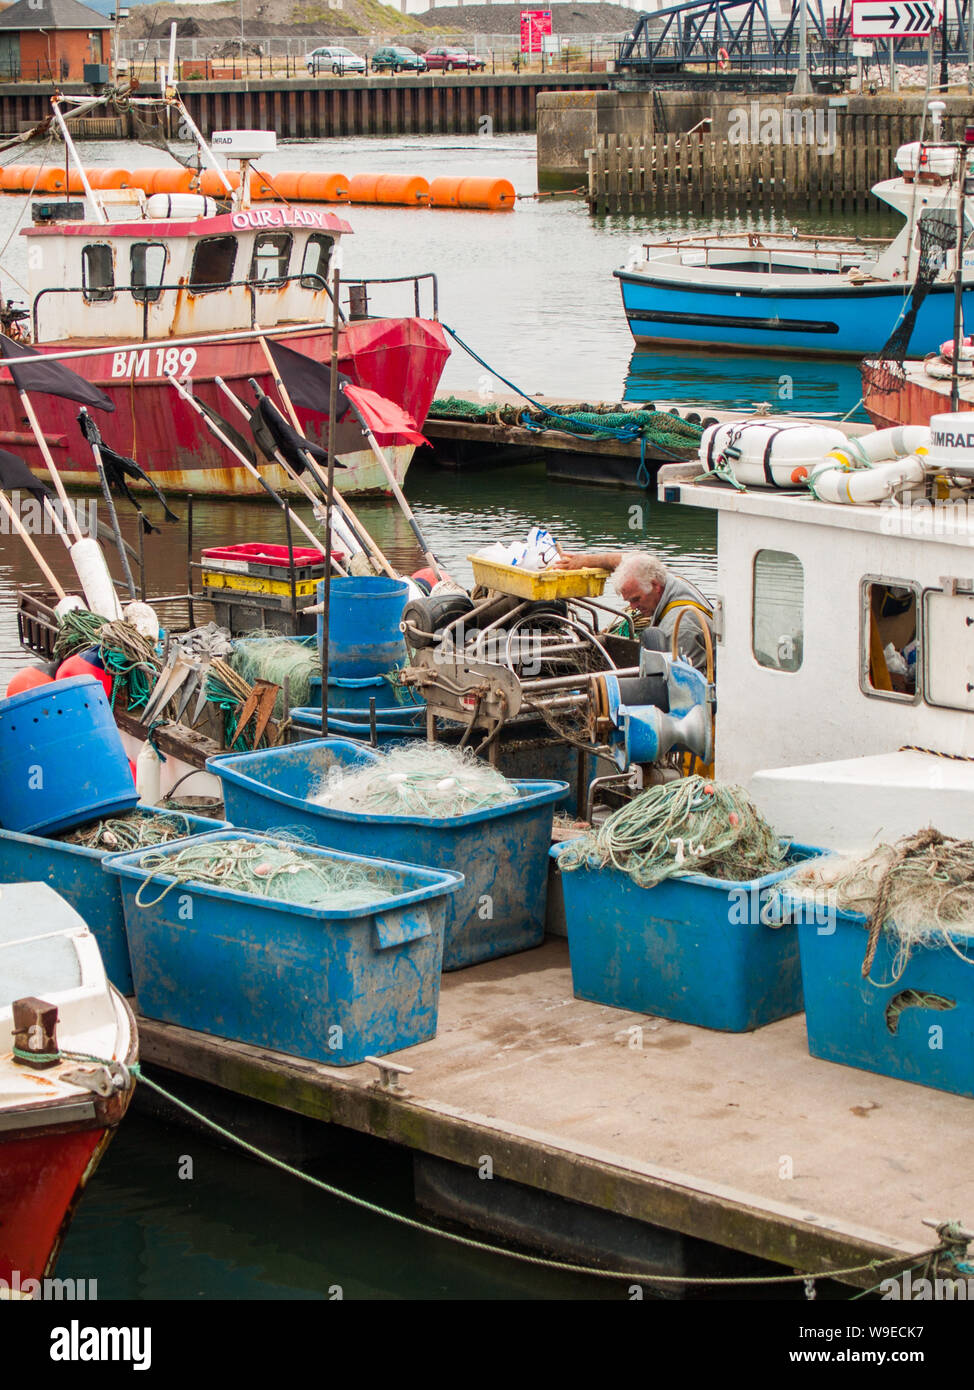 Swansea marina. Fishing boats are tied up at the dock. Fishing equipment and nets are on the dock. A fisherman is working on his boat. Wales, UK. Stock Photo